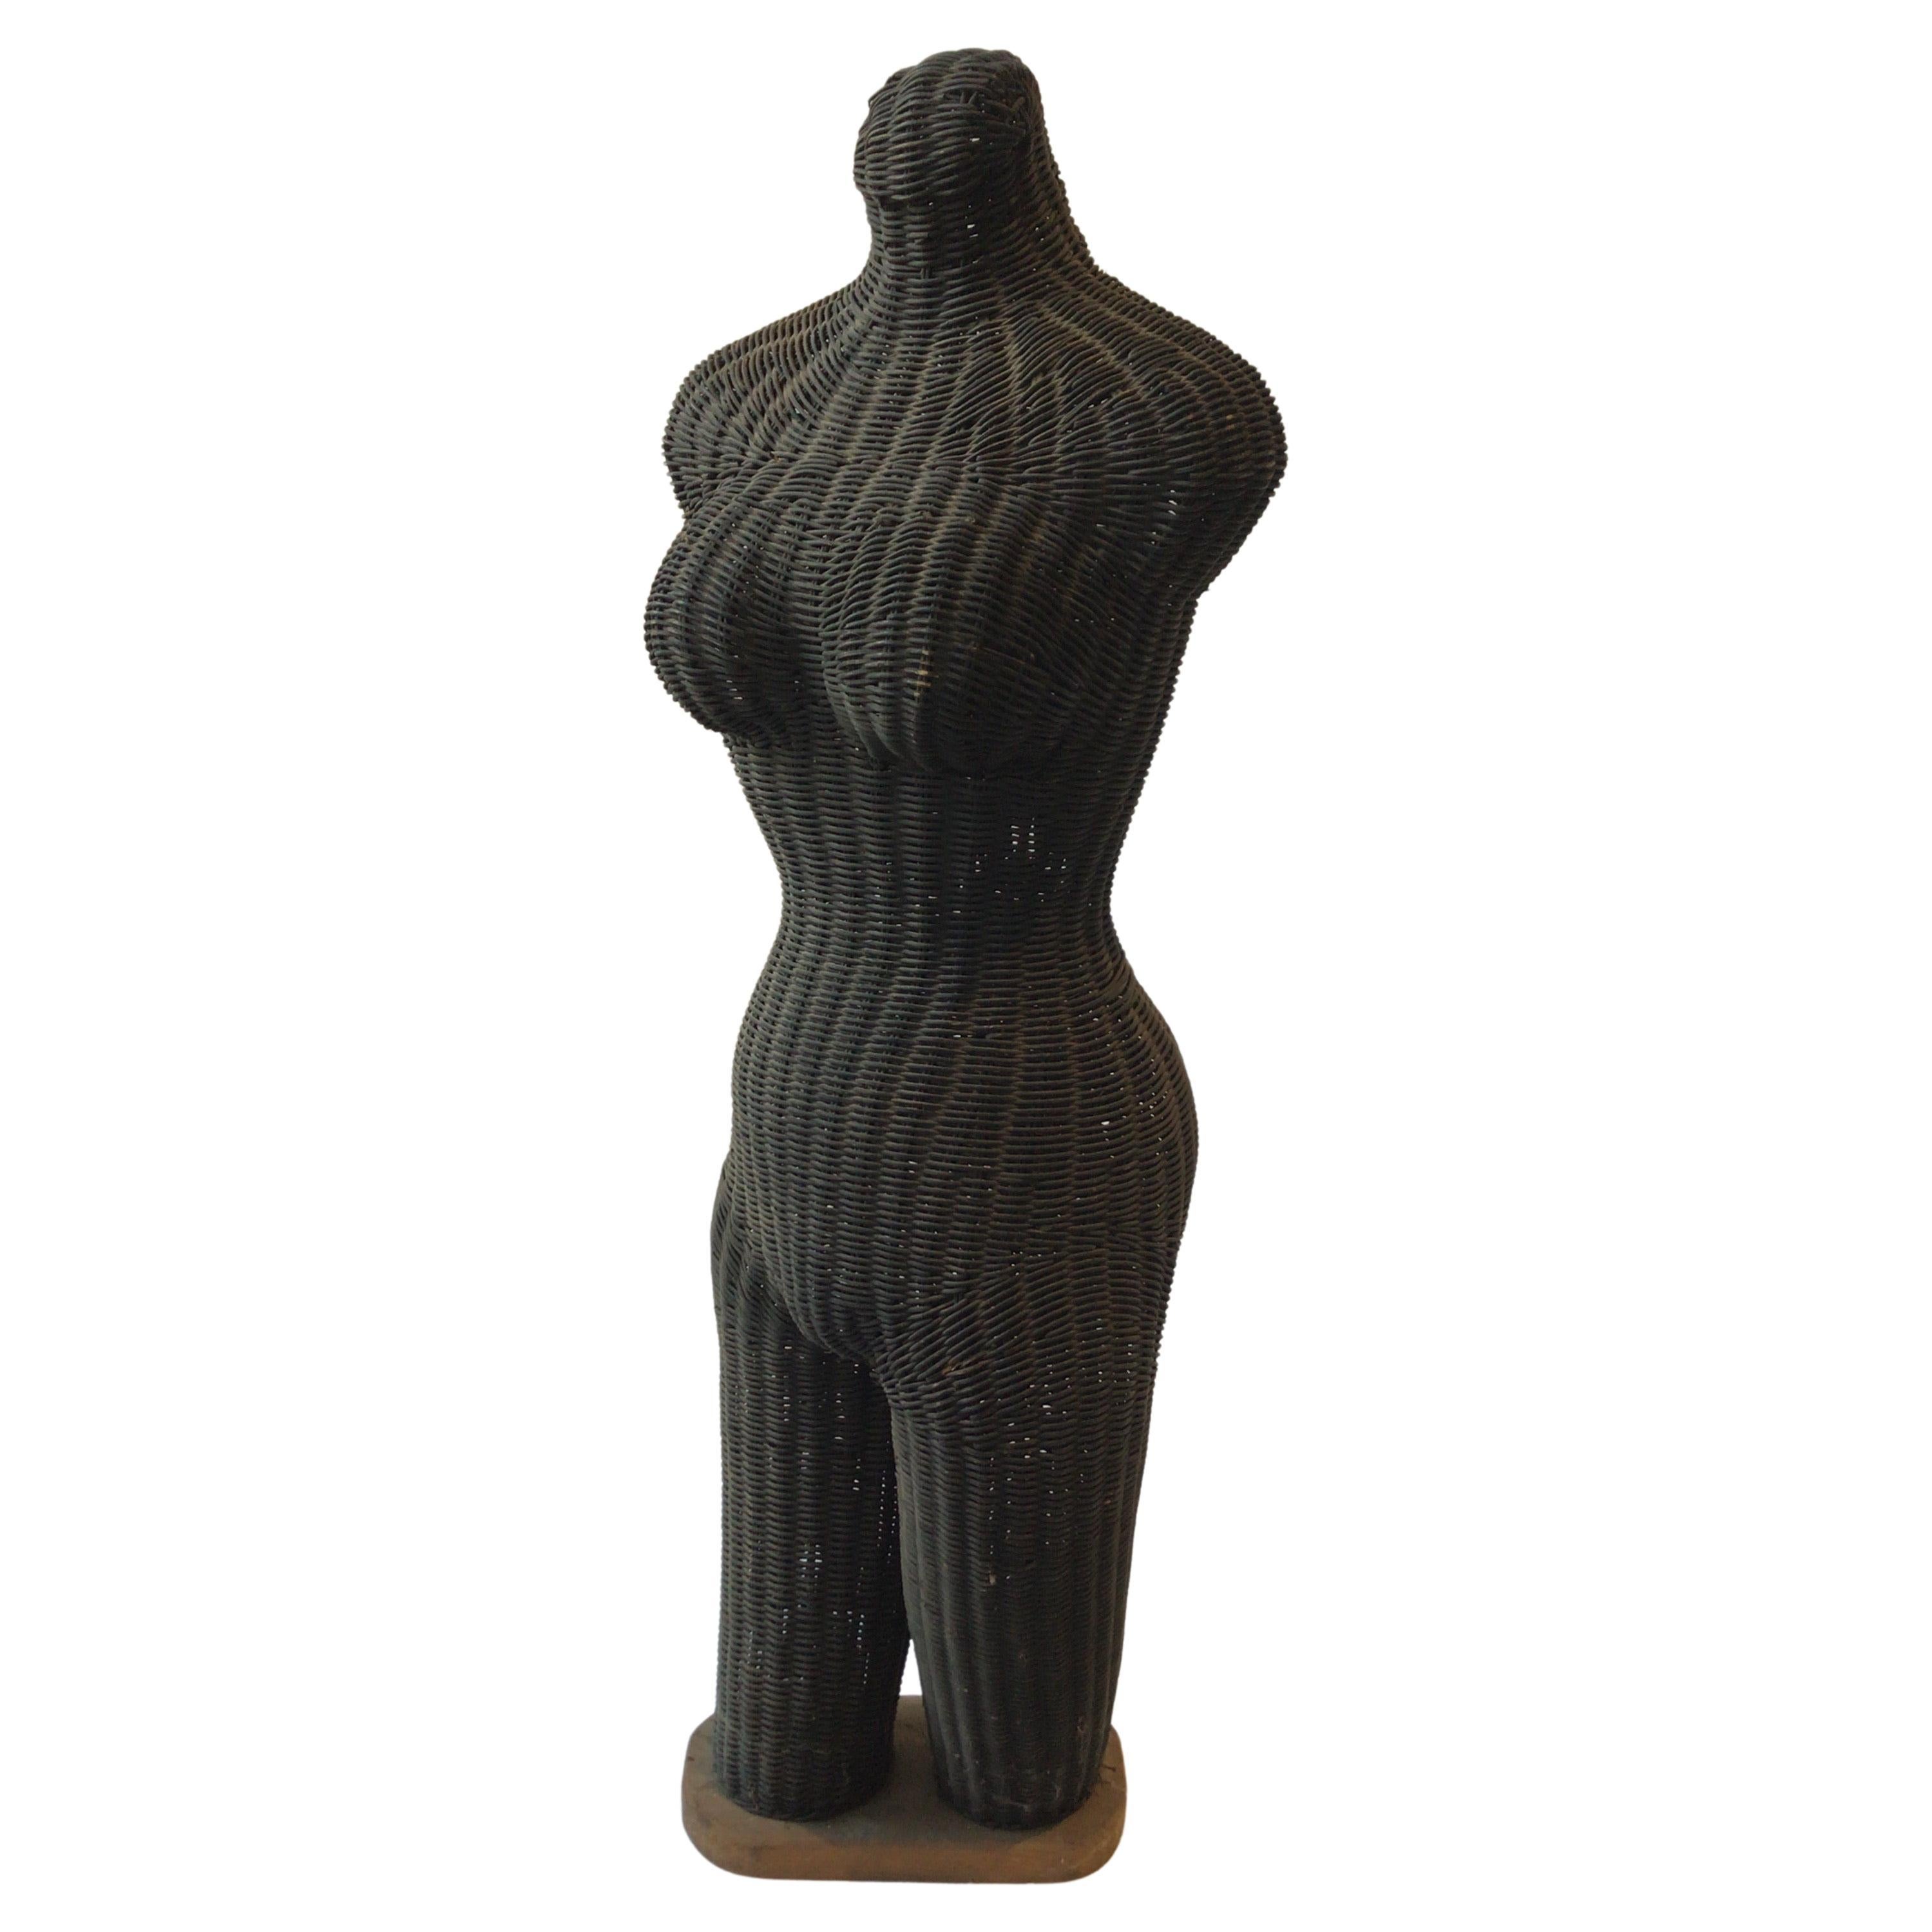 1960s Wicker Sculpture of a Nude Woman For Sale